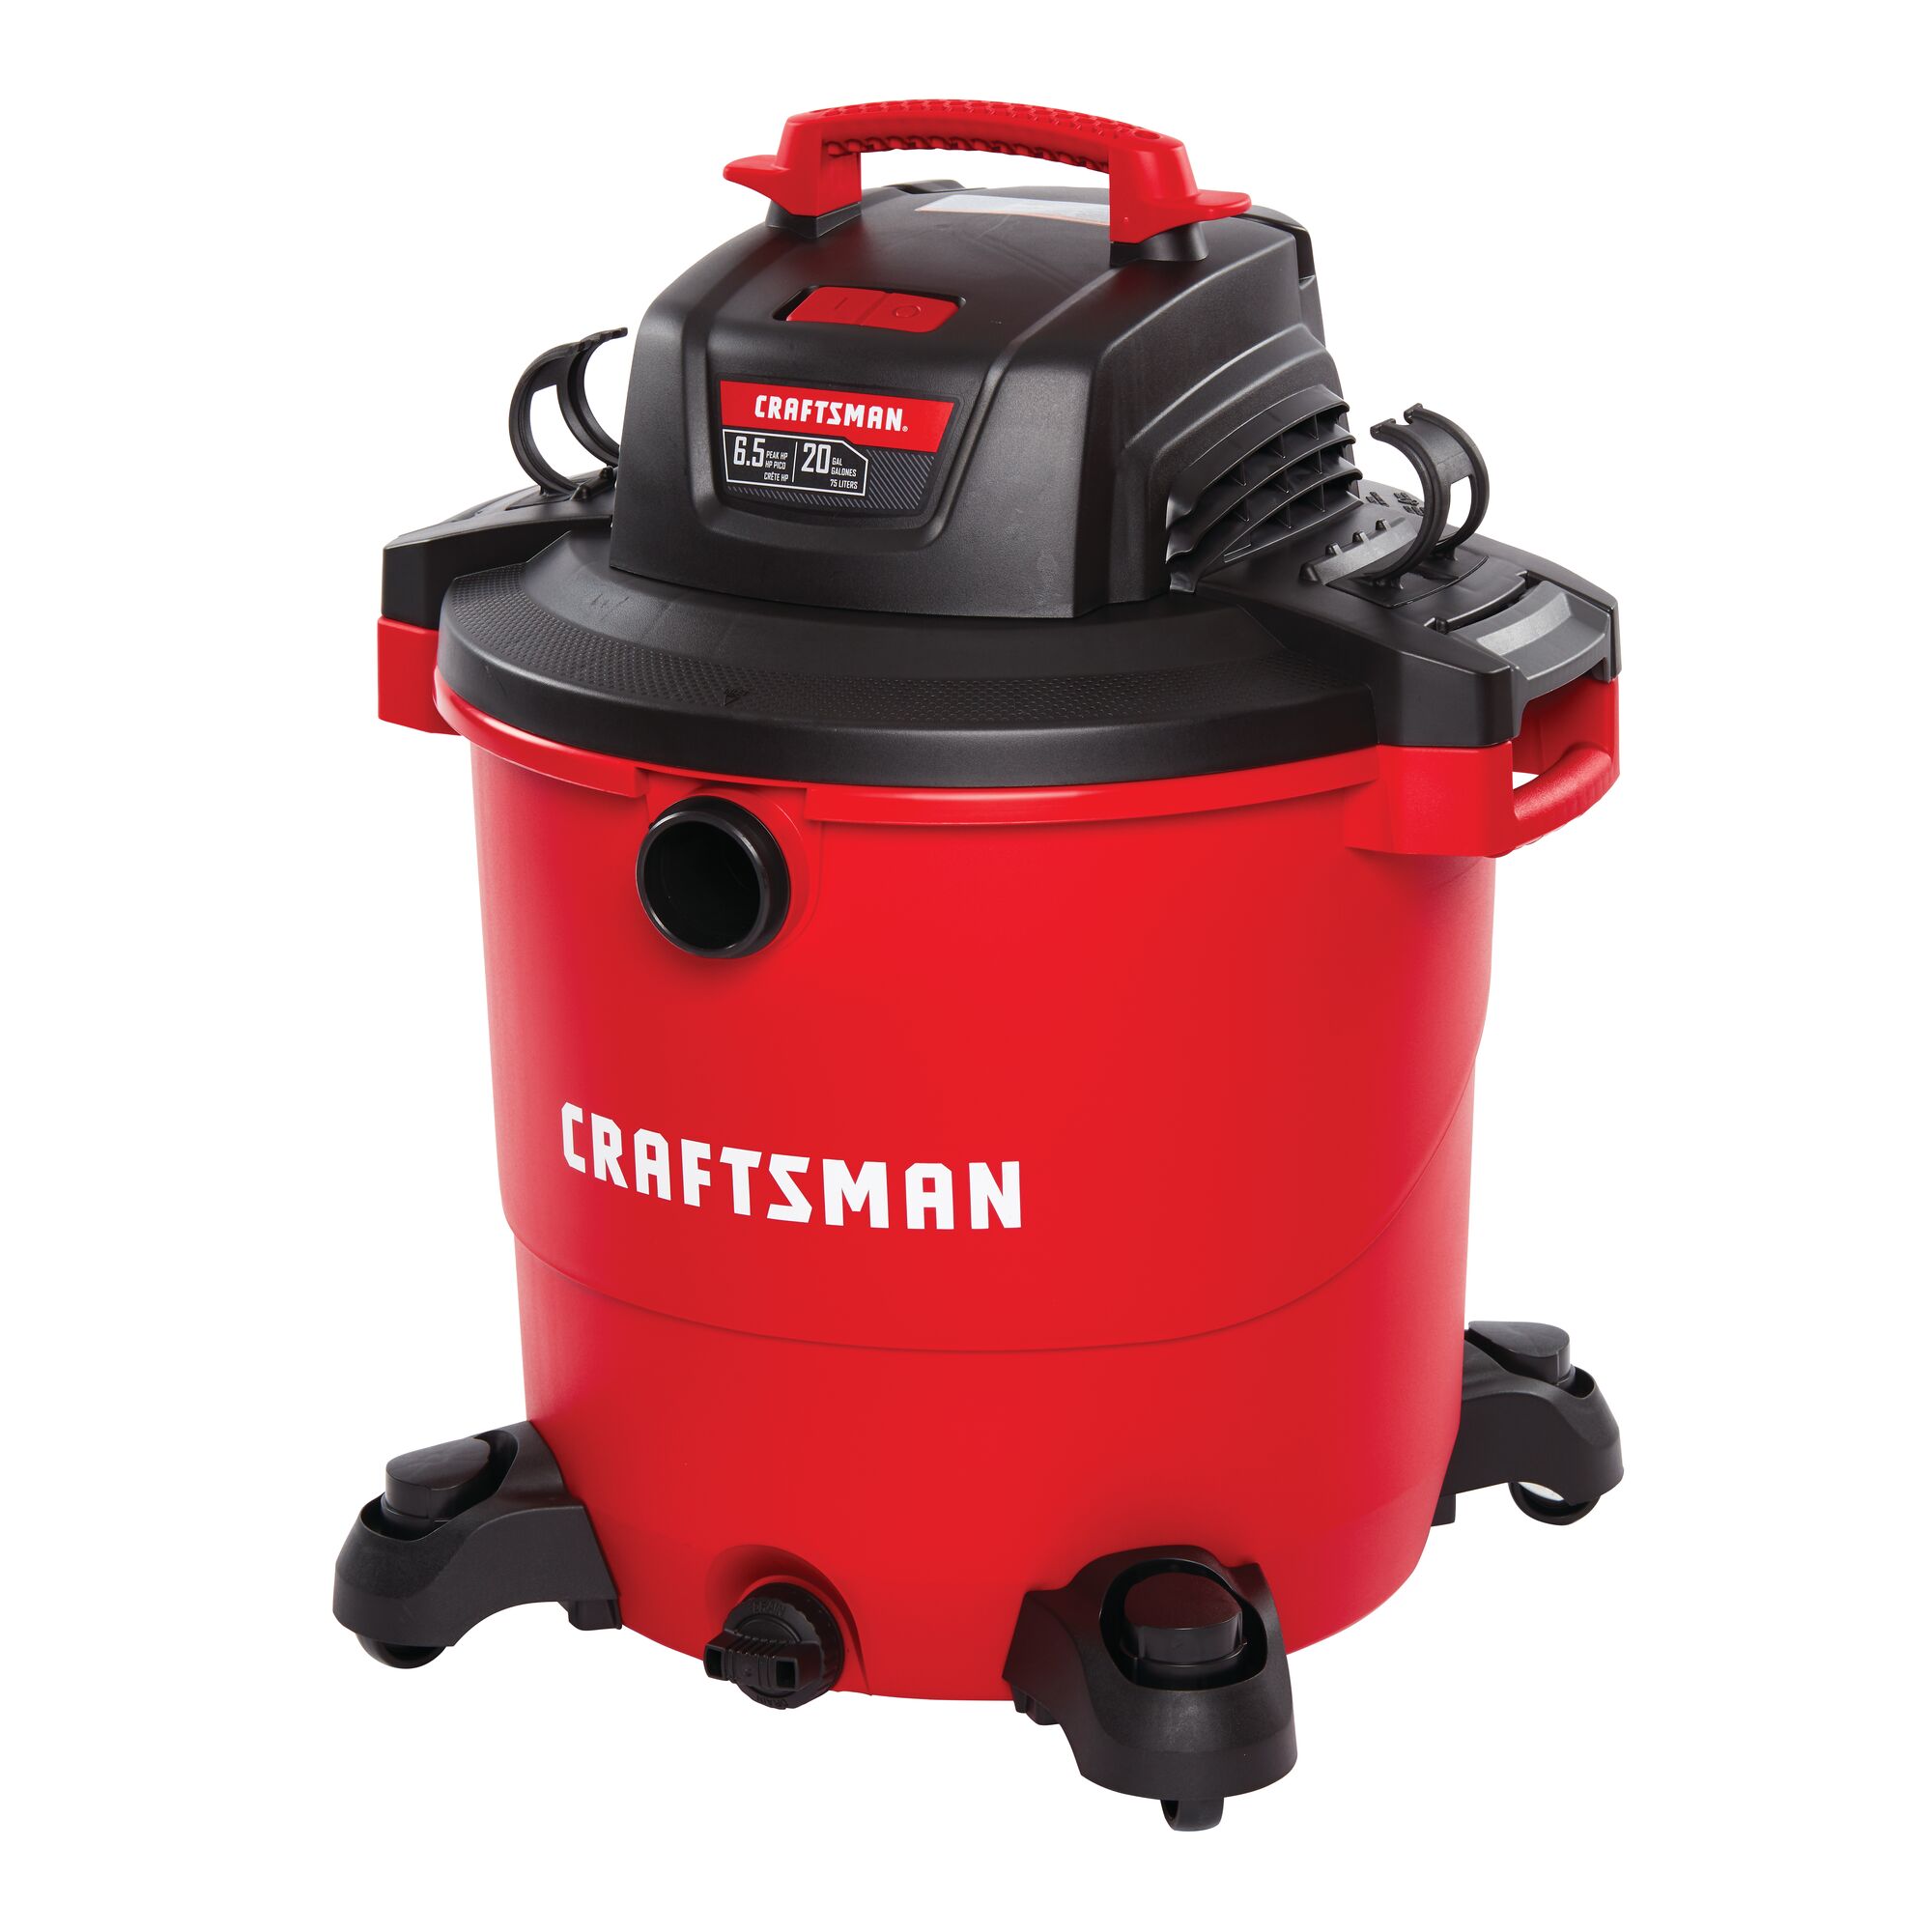 View of CRAFTSMAN Accessories: Vacuums on white background